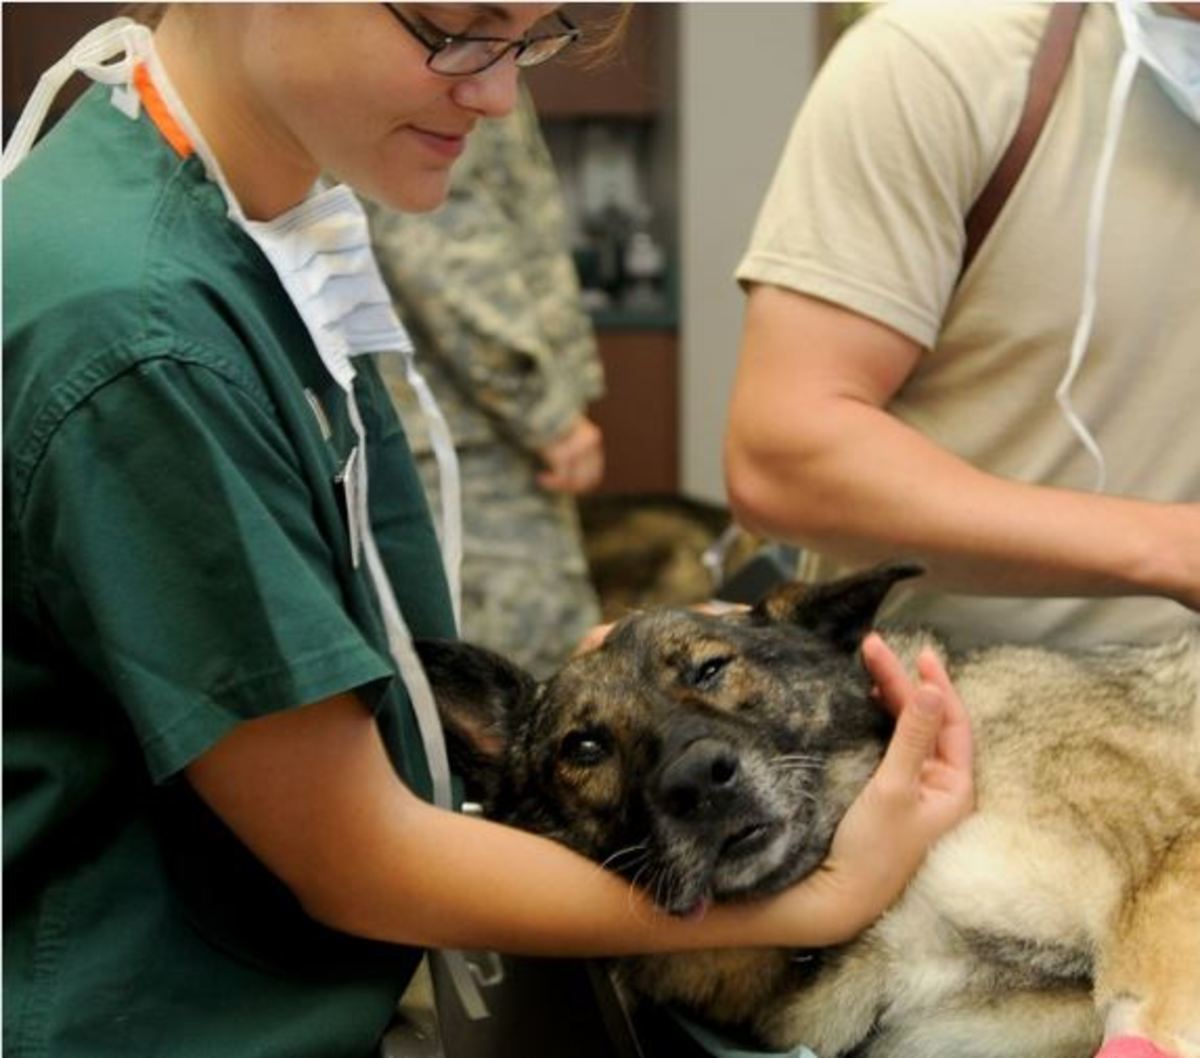  A dog's cesarean section procedure requires anesthesia.